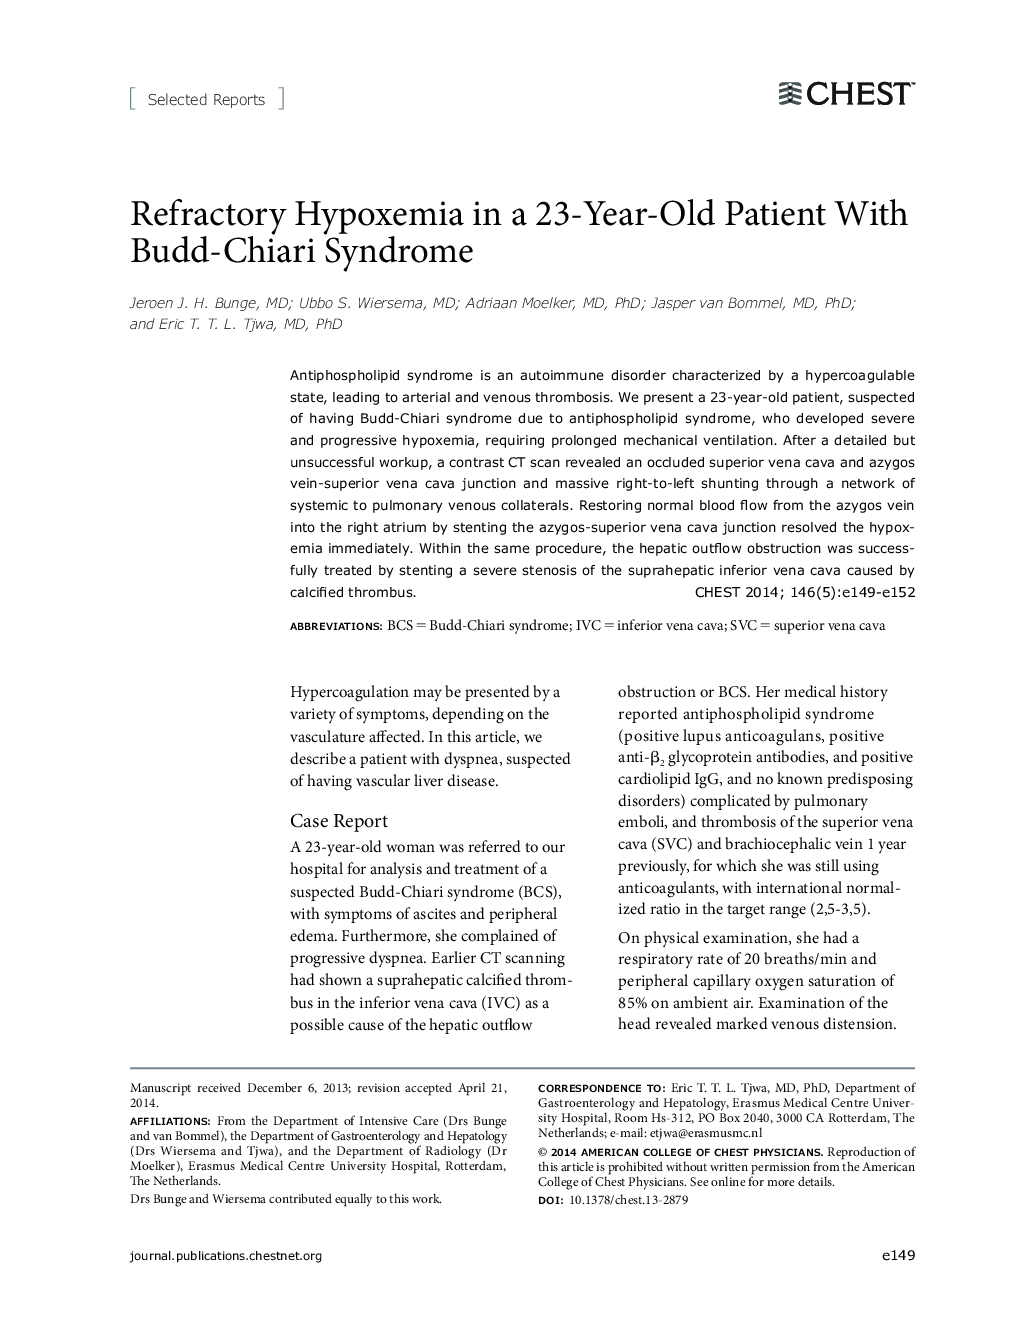 Refractory Hypoxemia in a 23-Year-Old Patient With Budd-Chiari Syndrome